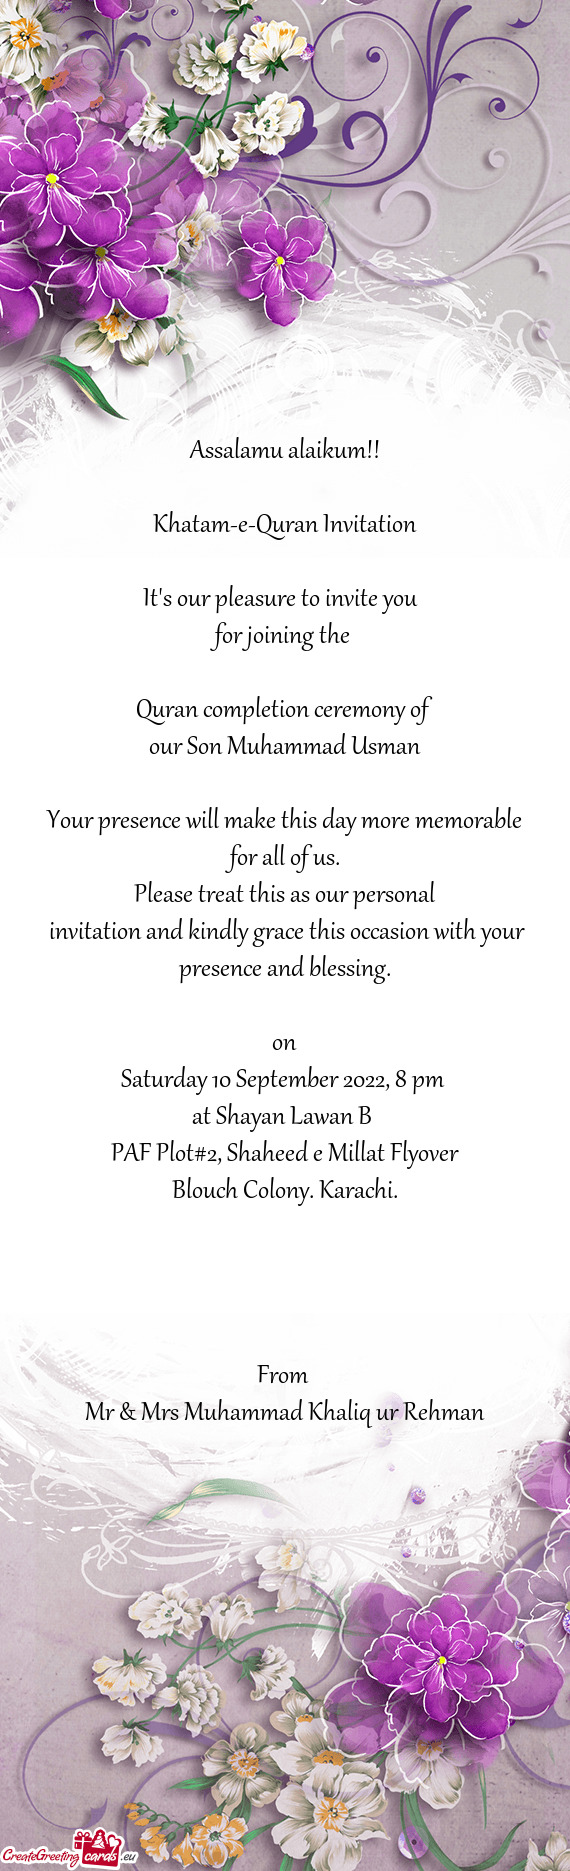 Invitation and kindly grace this occasion with your presence and blessing